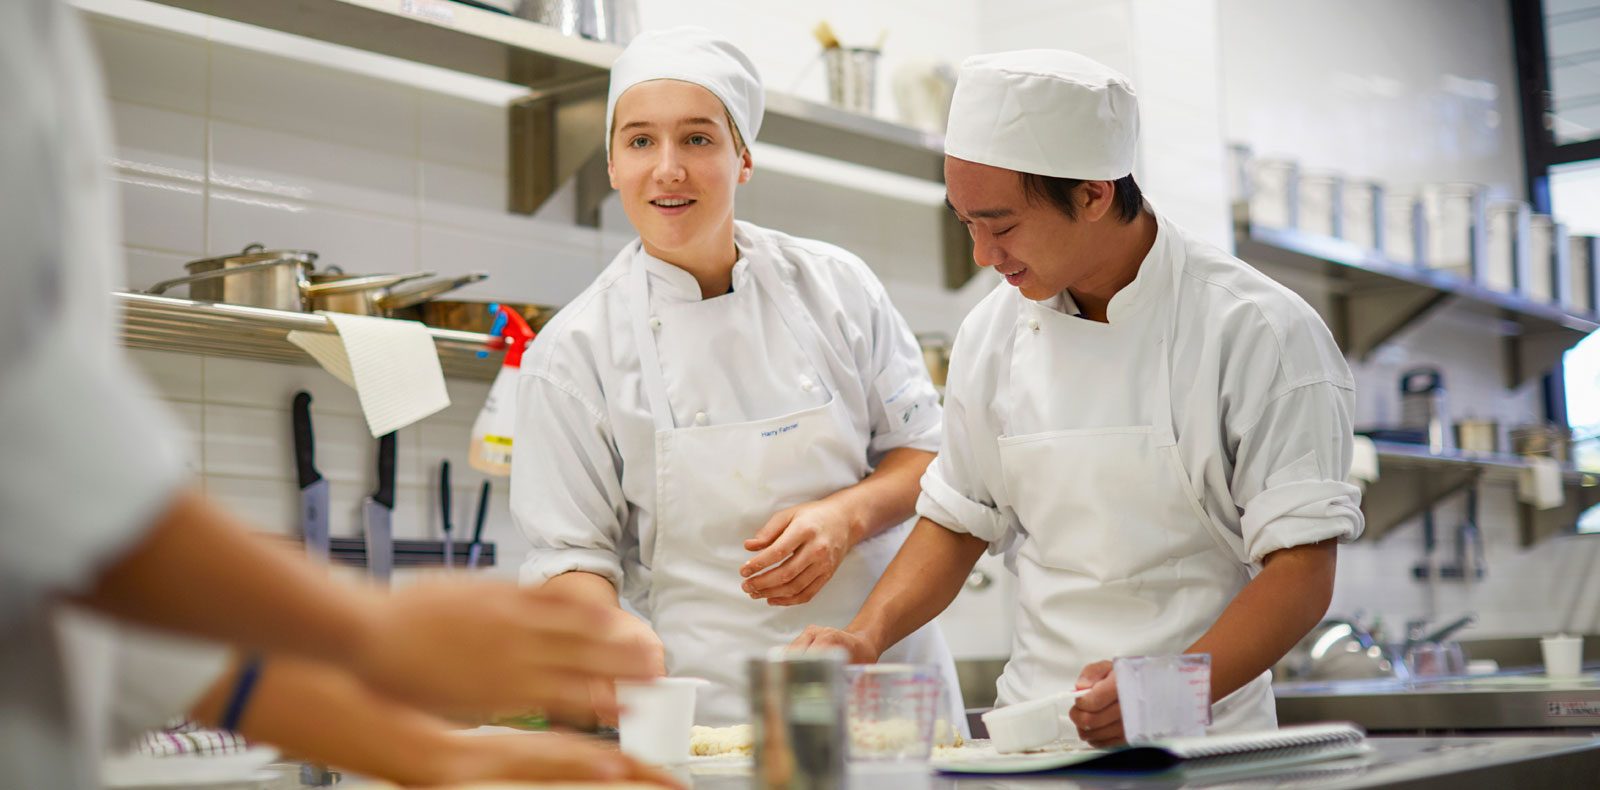 Vocational program students in a commercial kitchen wearing chef uniforms